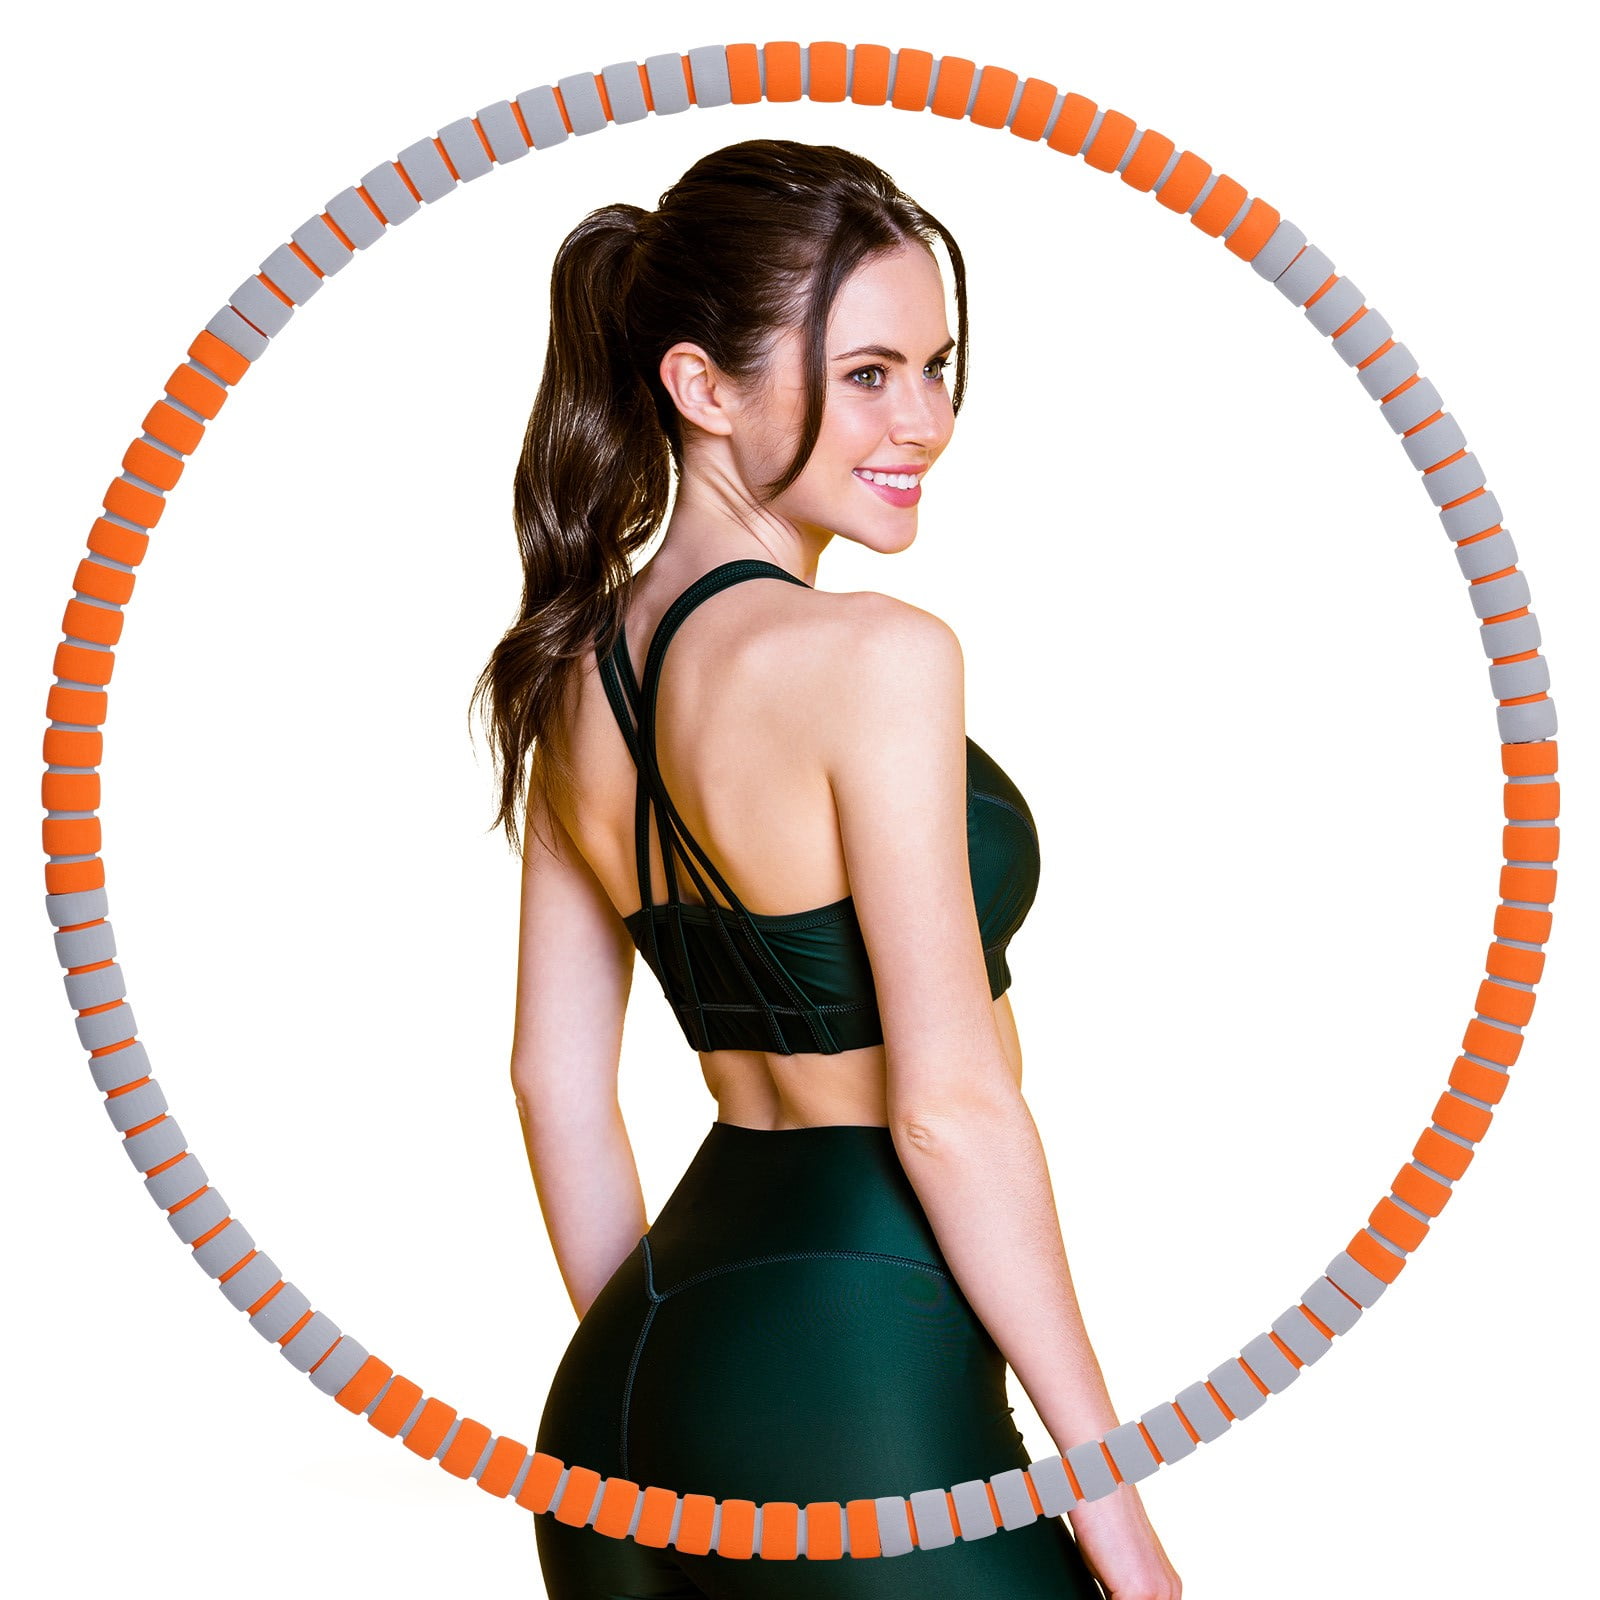 Details about   Fitness Exercise Hula Hoop Detachable Home Lose Plastic Workout Adult Hoola USA 